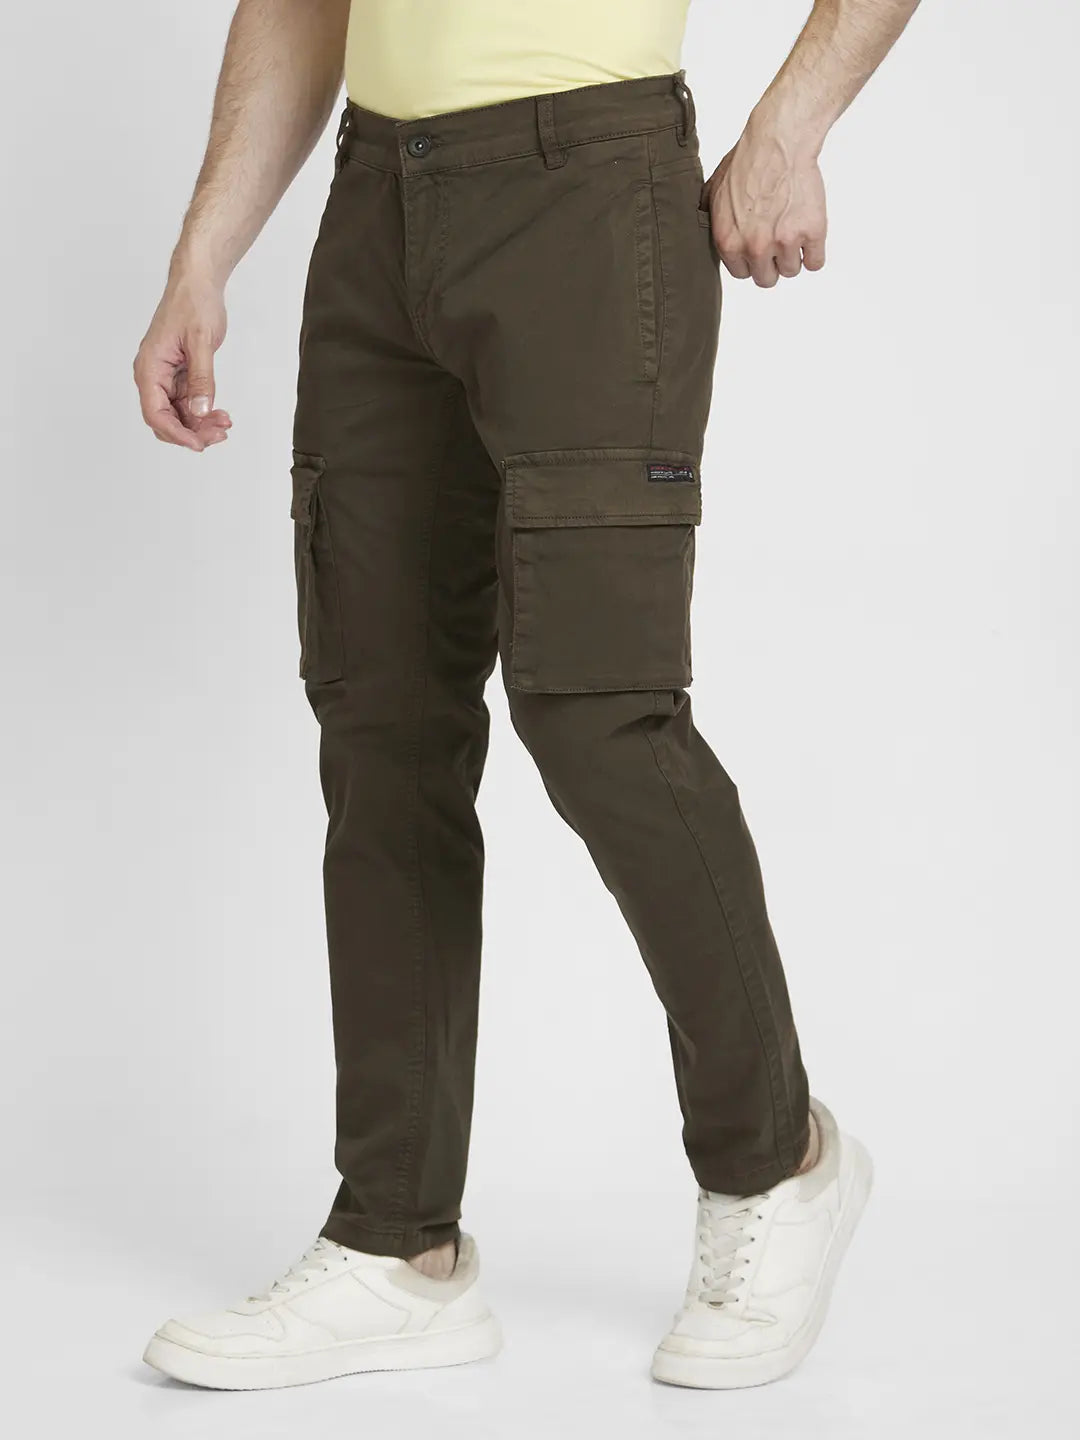 Hence Men Military print Tapered Cargo Pants